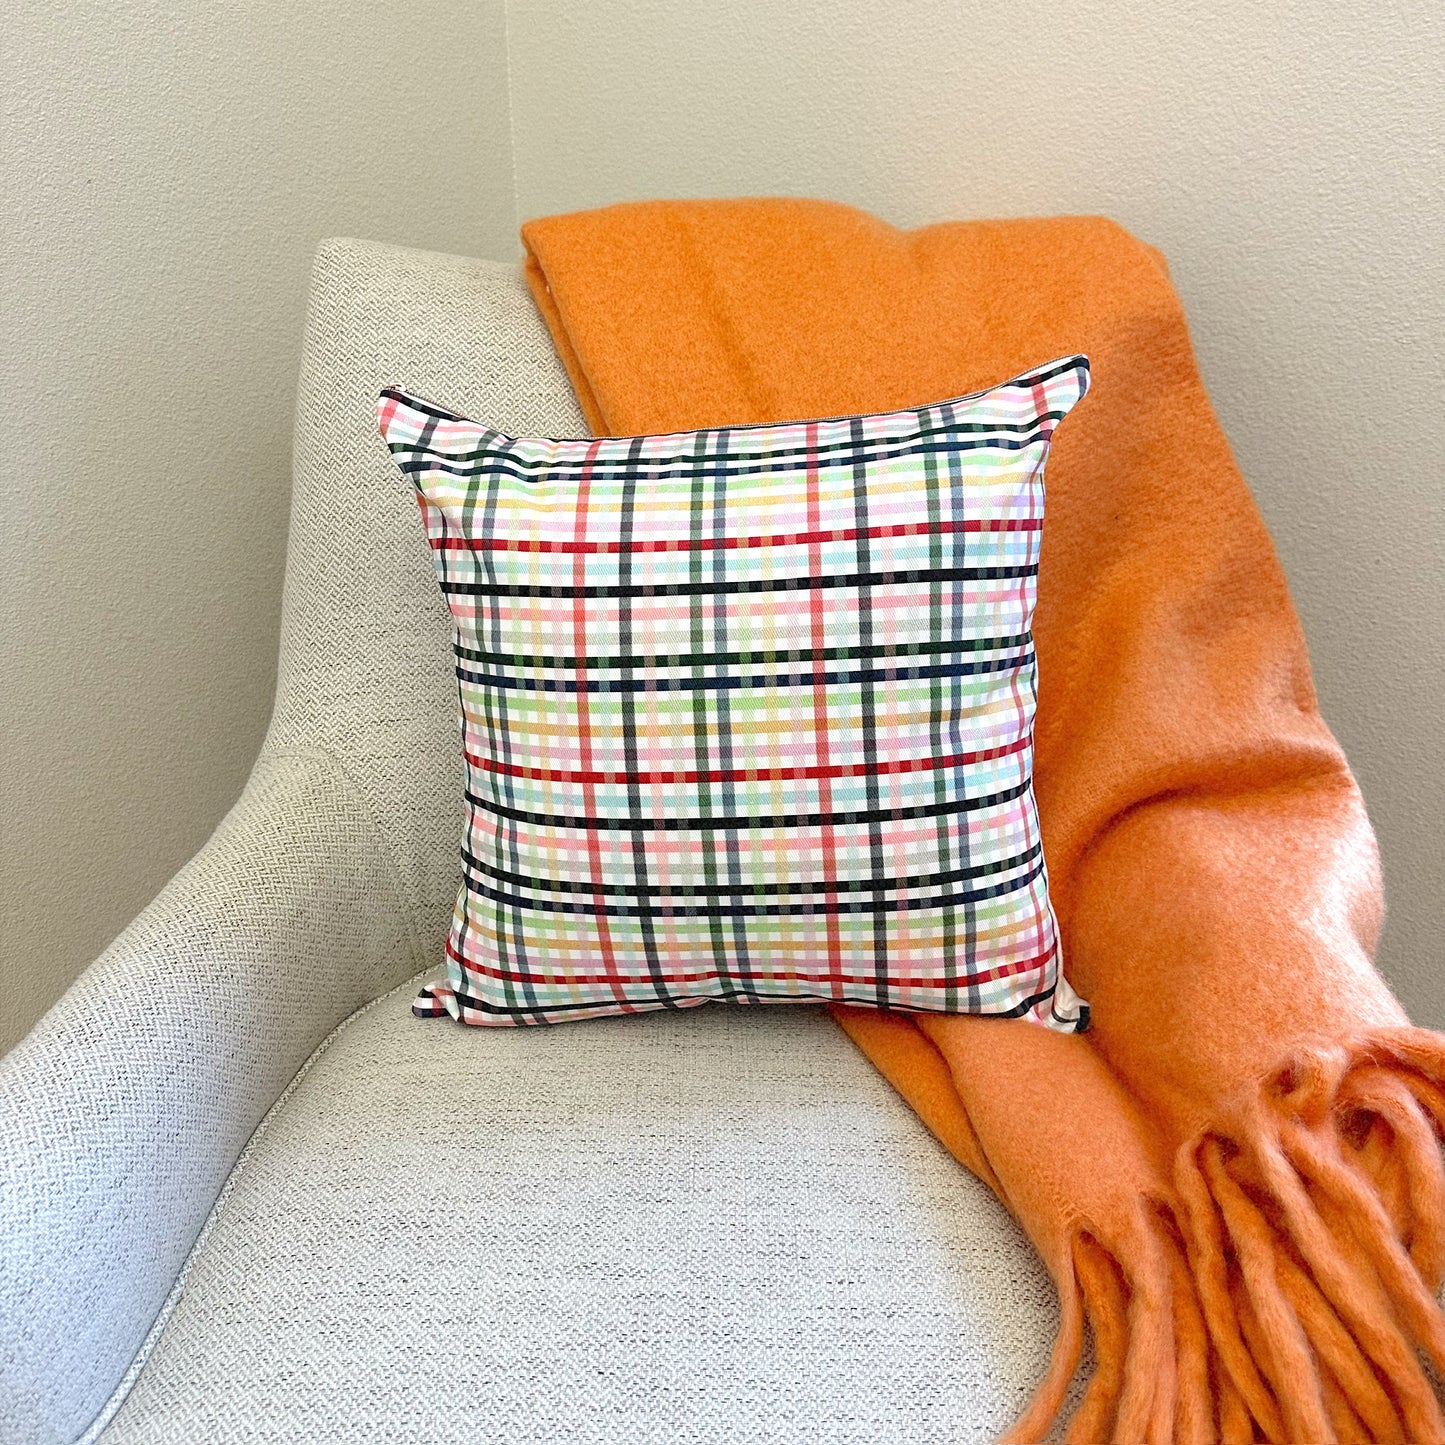 Taylor Swift - Eras Gingham Pillow Cover + Apricot Throw